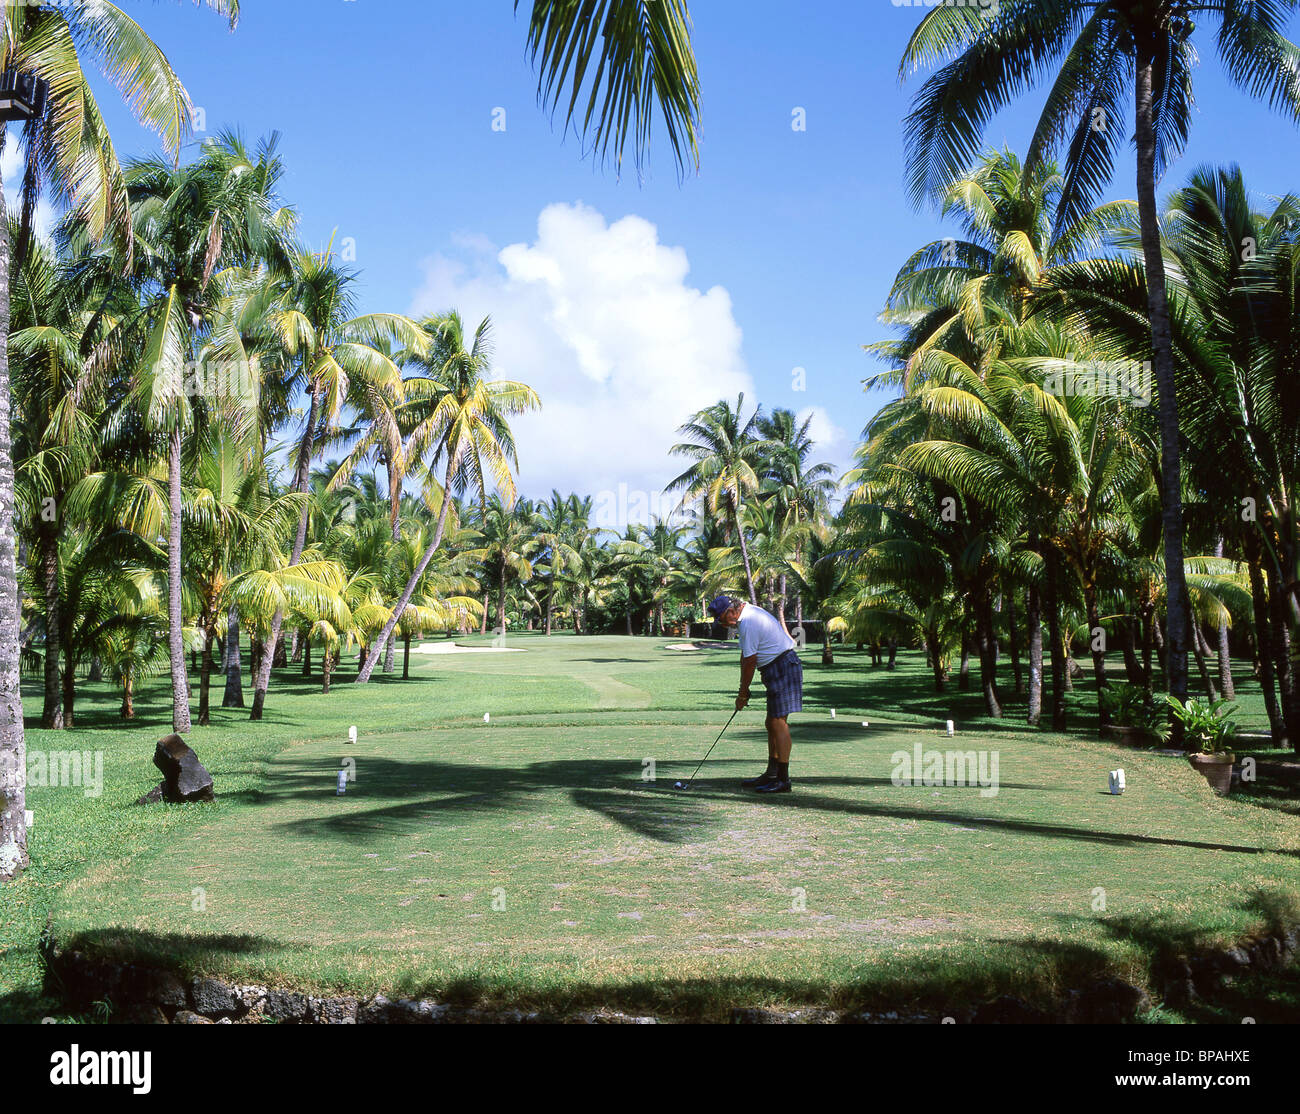 Golf course, One and Only Le Saint Geran Hotel, Belle Mare, Flacq District, Republic of Mauritius Stock Photo